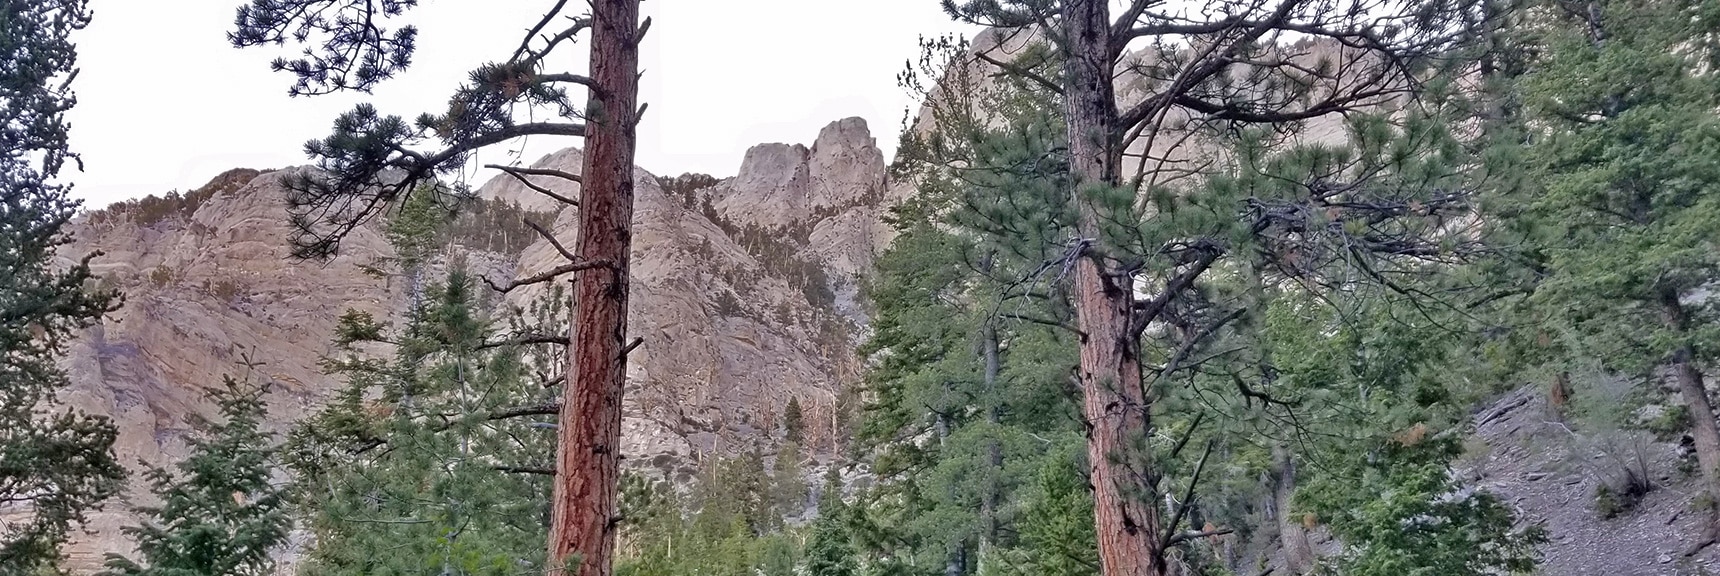 Potential Approach to Mummy's Head to Right of Wash | Mummy Mountain Summit Approach from Lee Canyon | Mt. Charleston Wilderness | Spring Mountains, Nevada